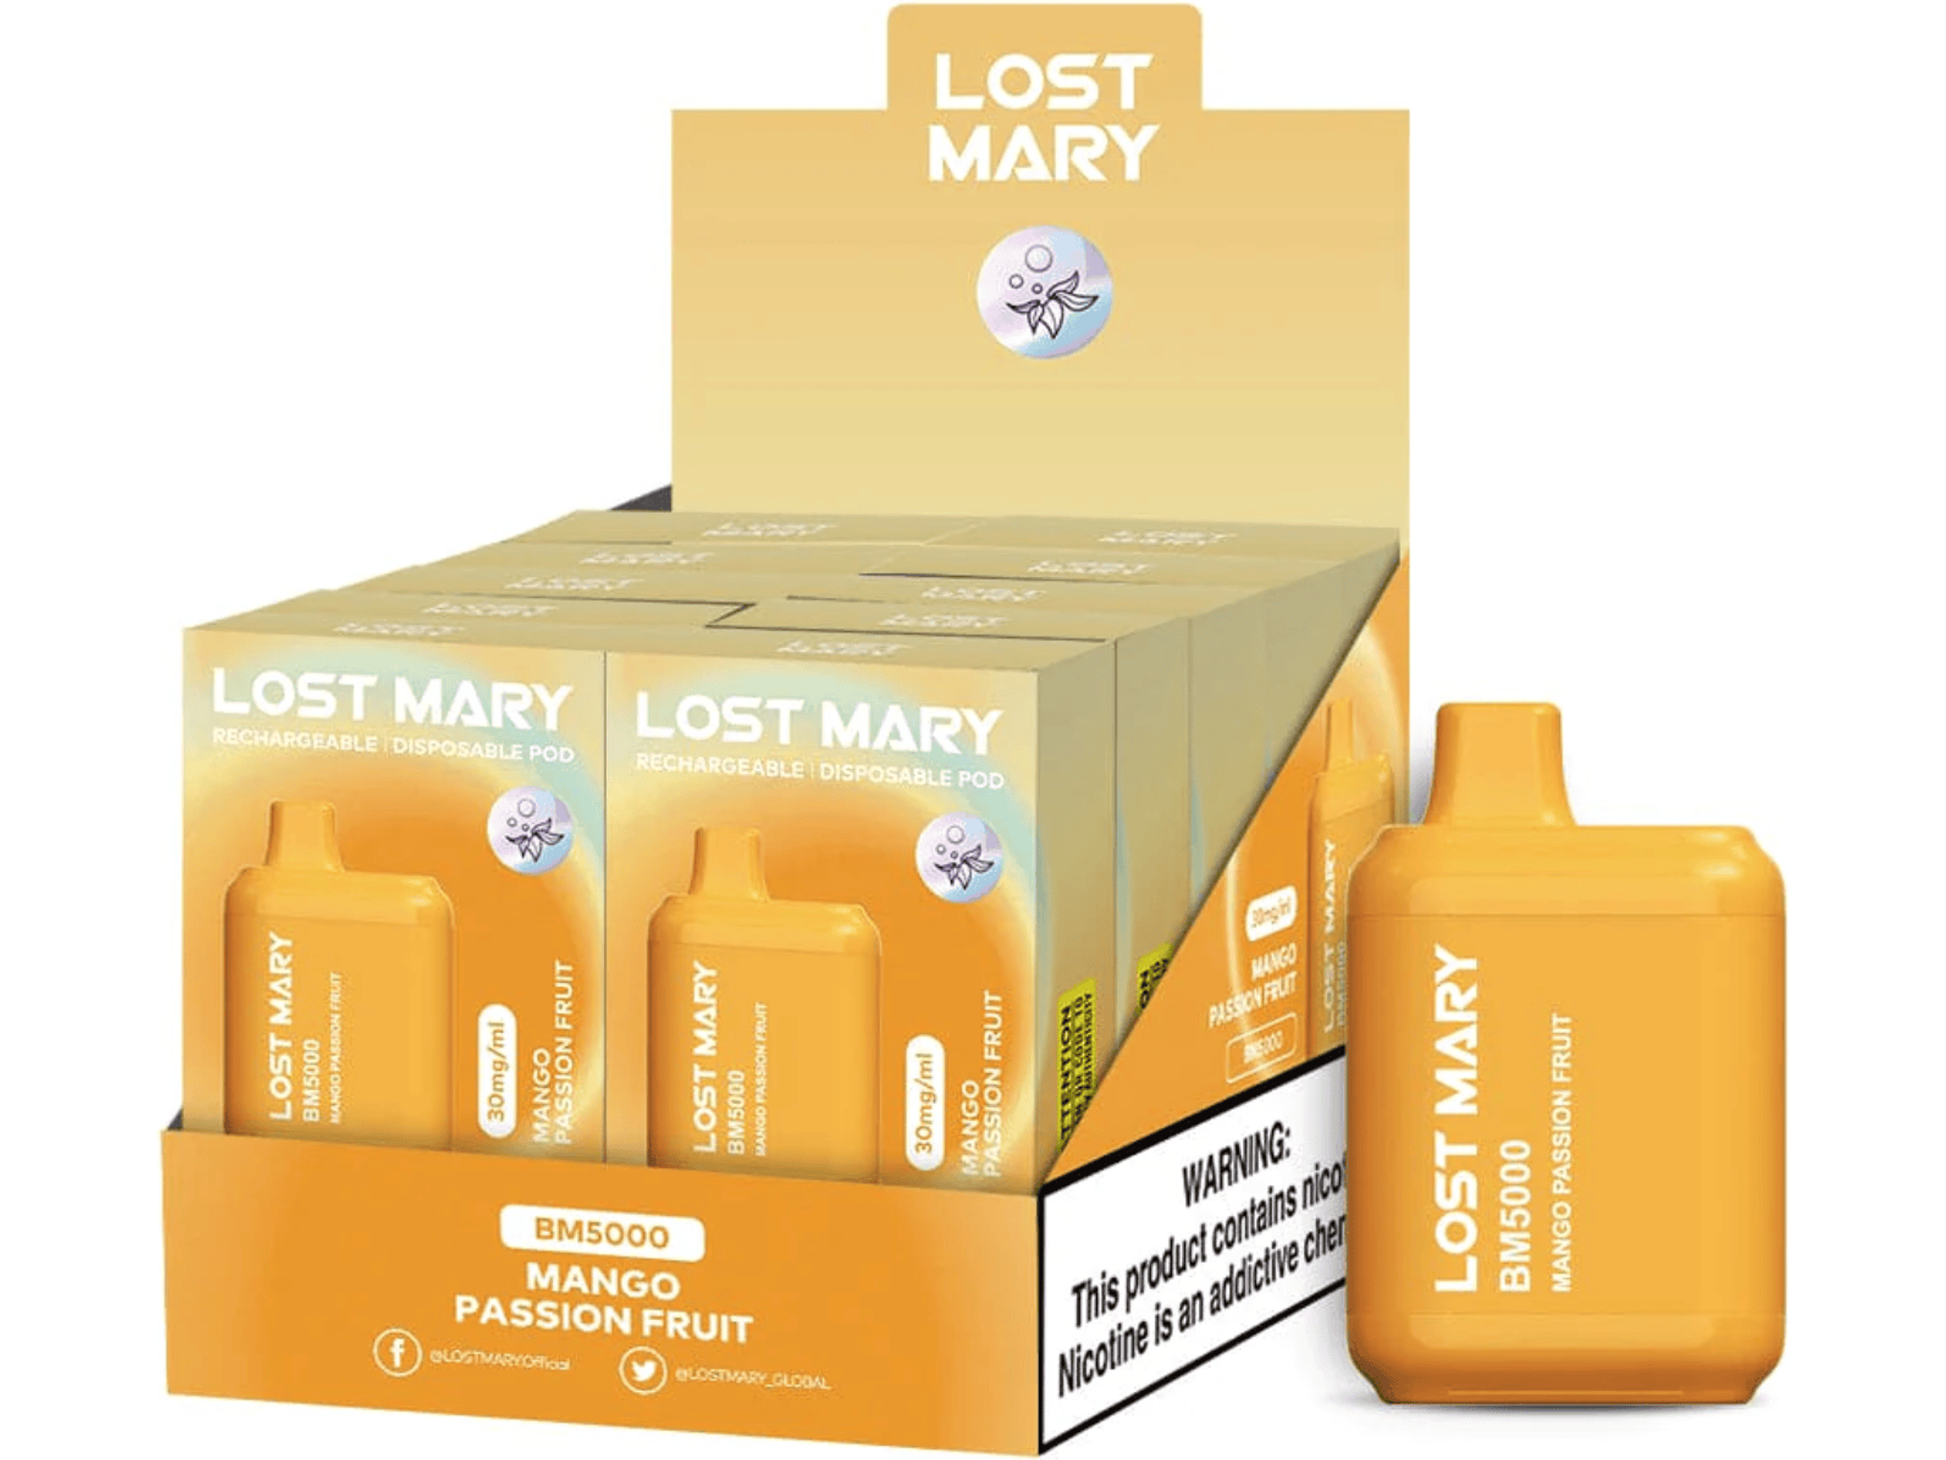 Lost Mary BM5000 Mango Passion Fruit flavored disposable vape device and box.